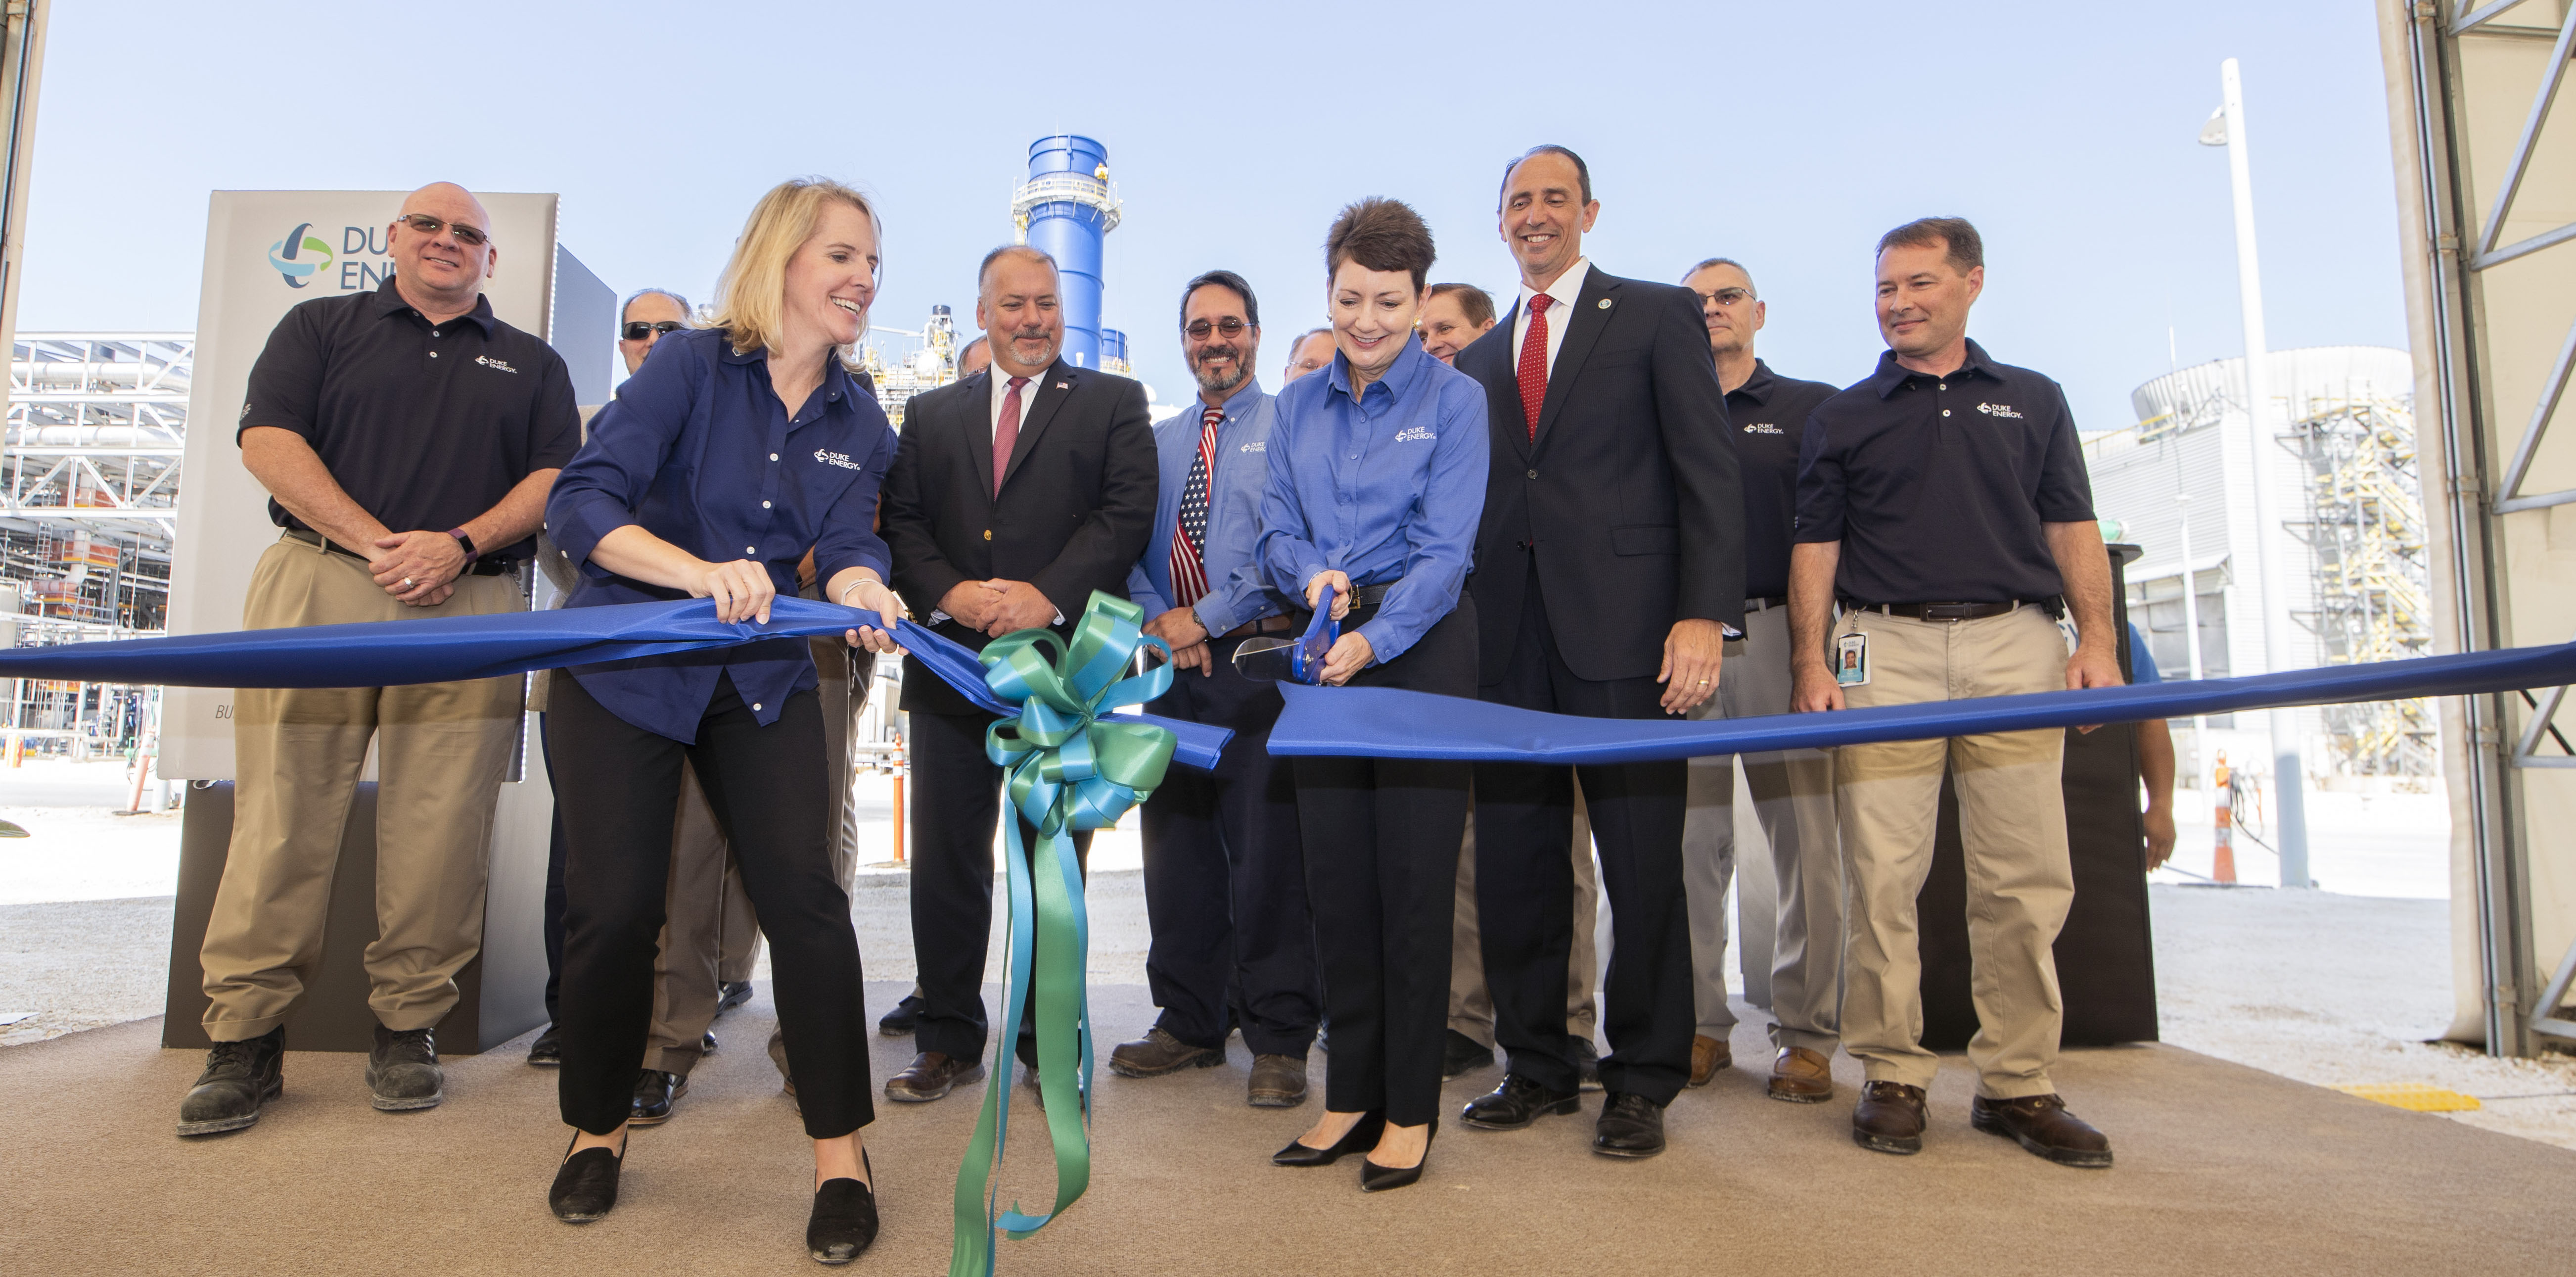 Duke Energy ‘flips the switch’ at ceremonial grand opening of new Citrus Combined Cycle Station